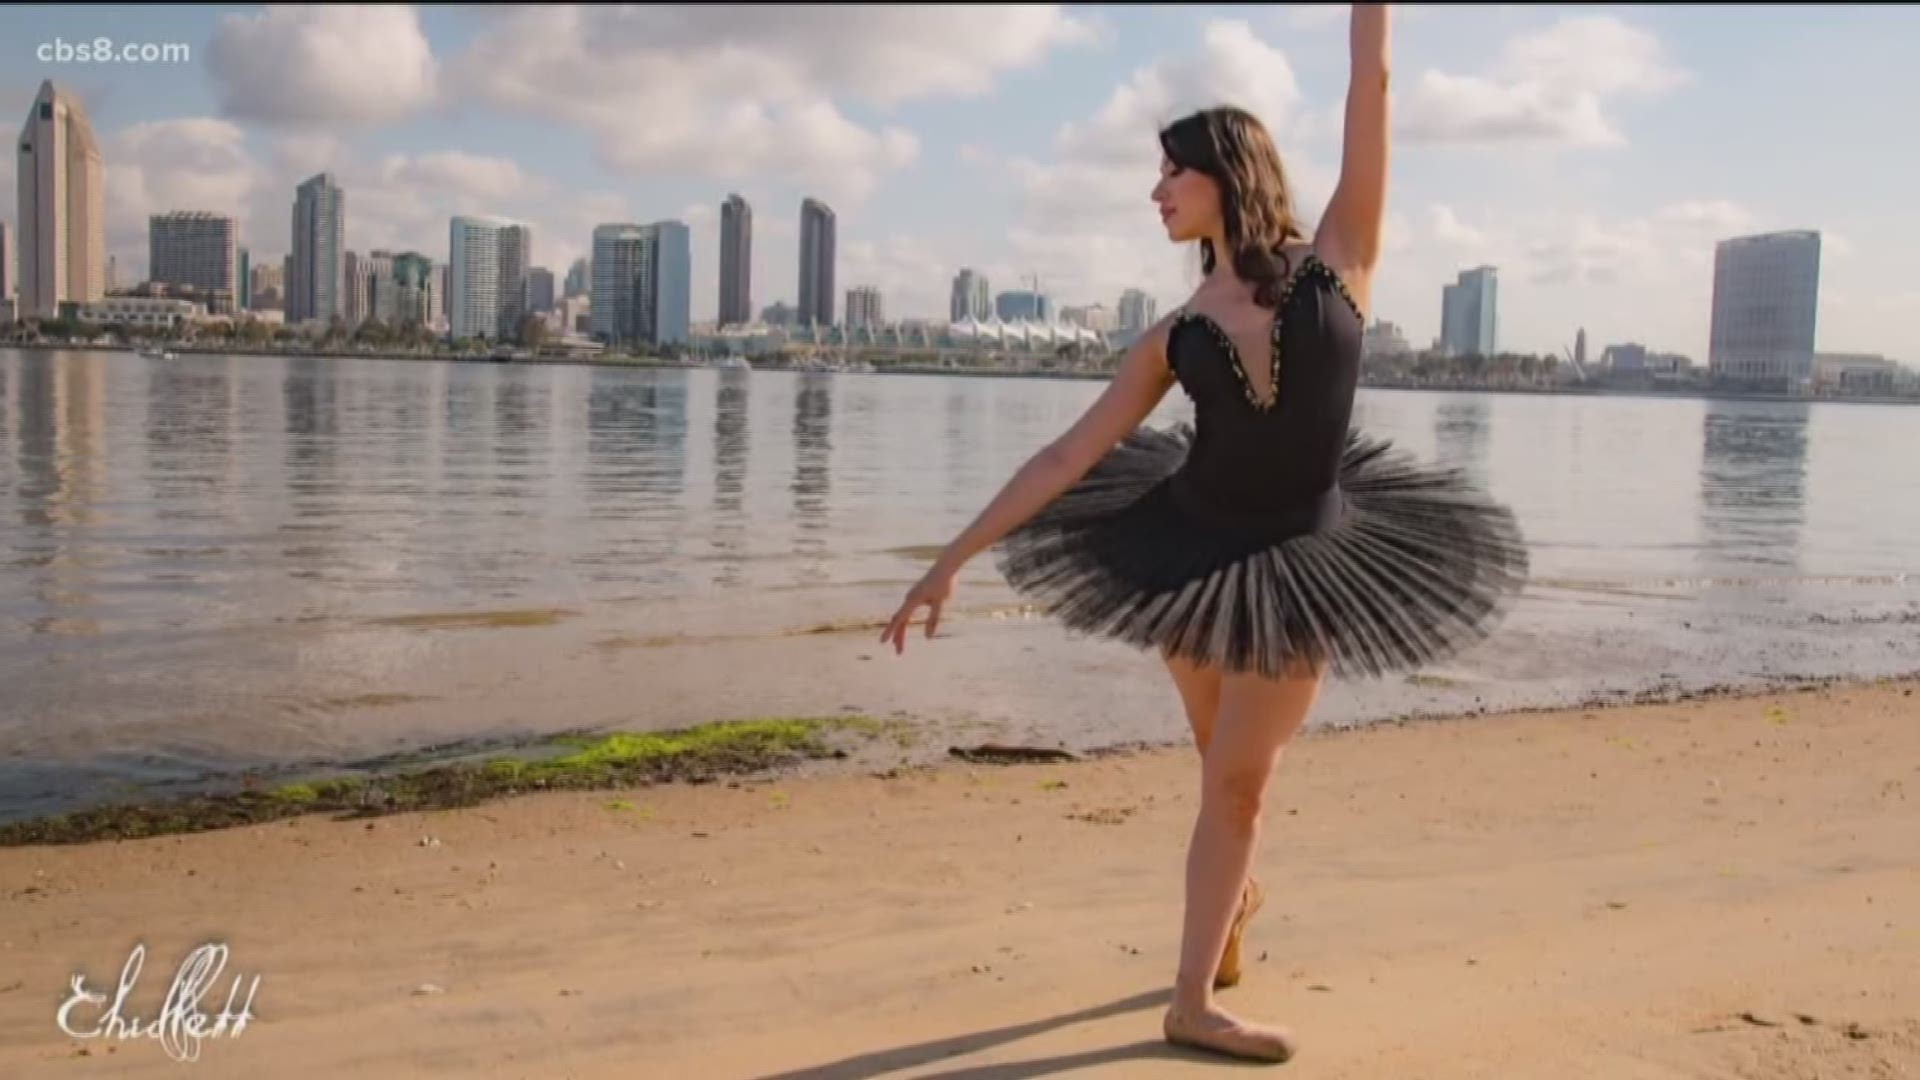 For nearly a decade, an aspiring young dancer had to power through pain caused by a congenital hip problem. Thanks to a procedure at Rady Children’s Hospital, there is nothing holding back her dreams.